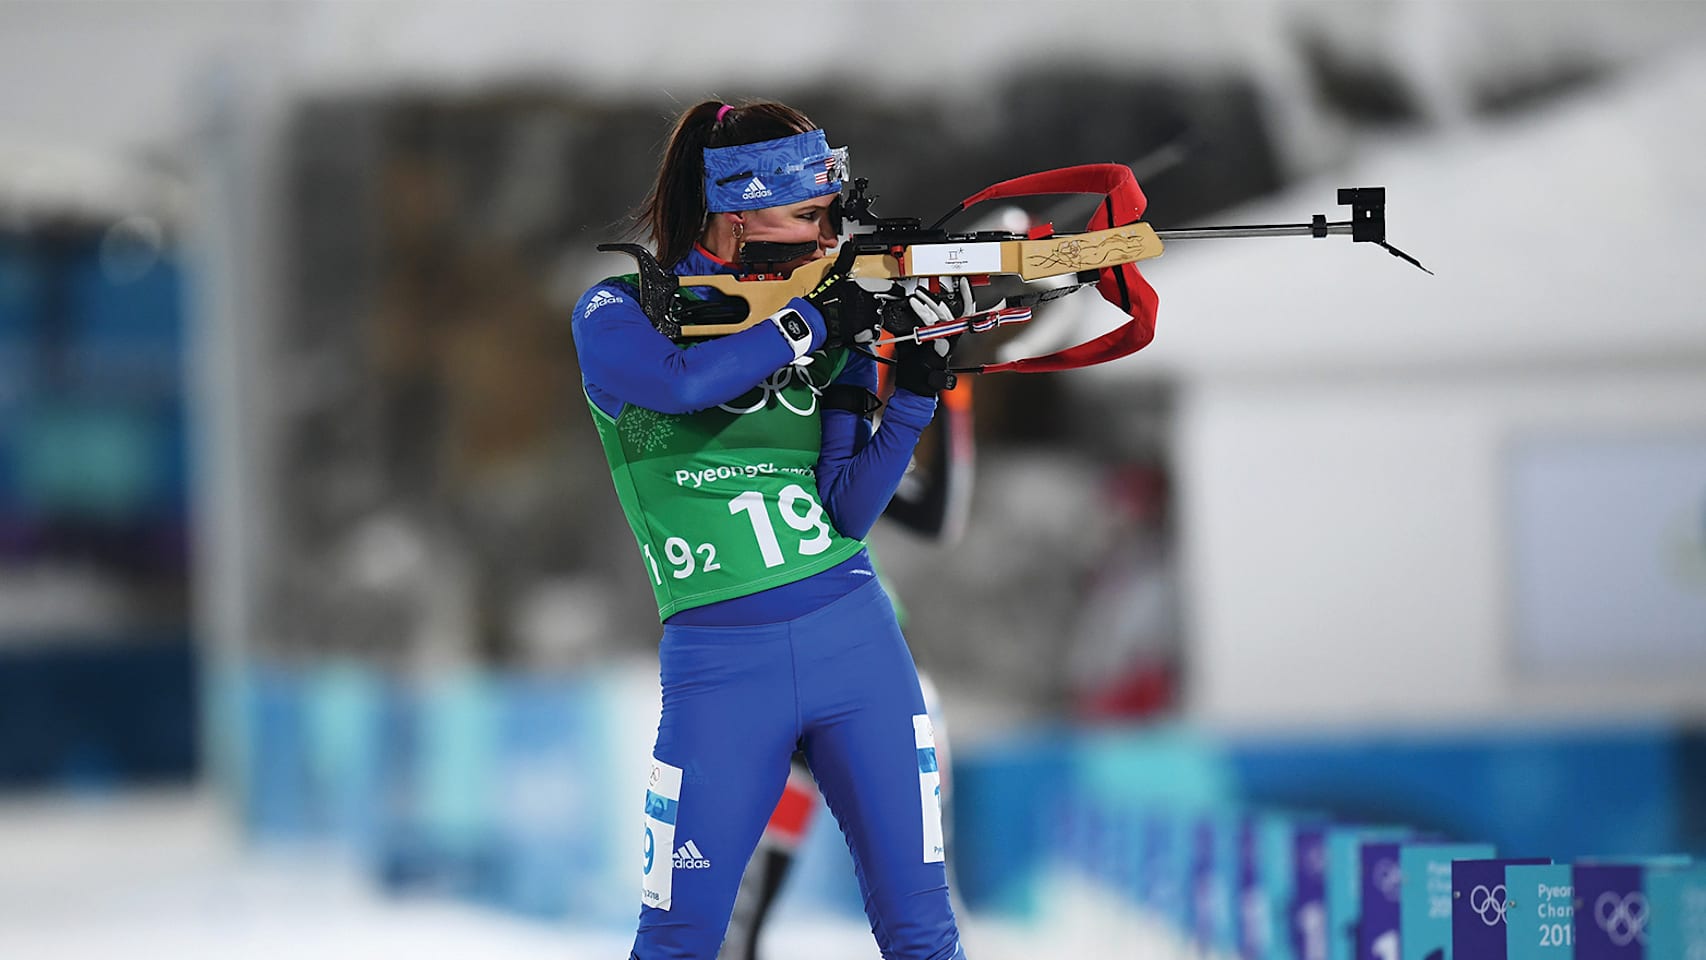 Olympic biathlon at Beijing 2022 Top five things to know